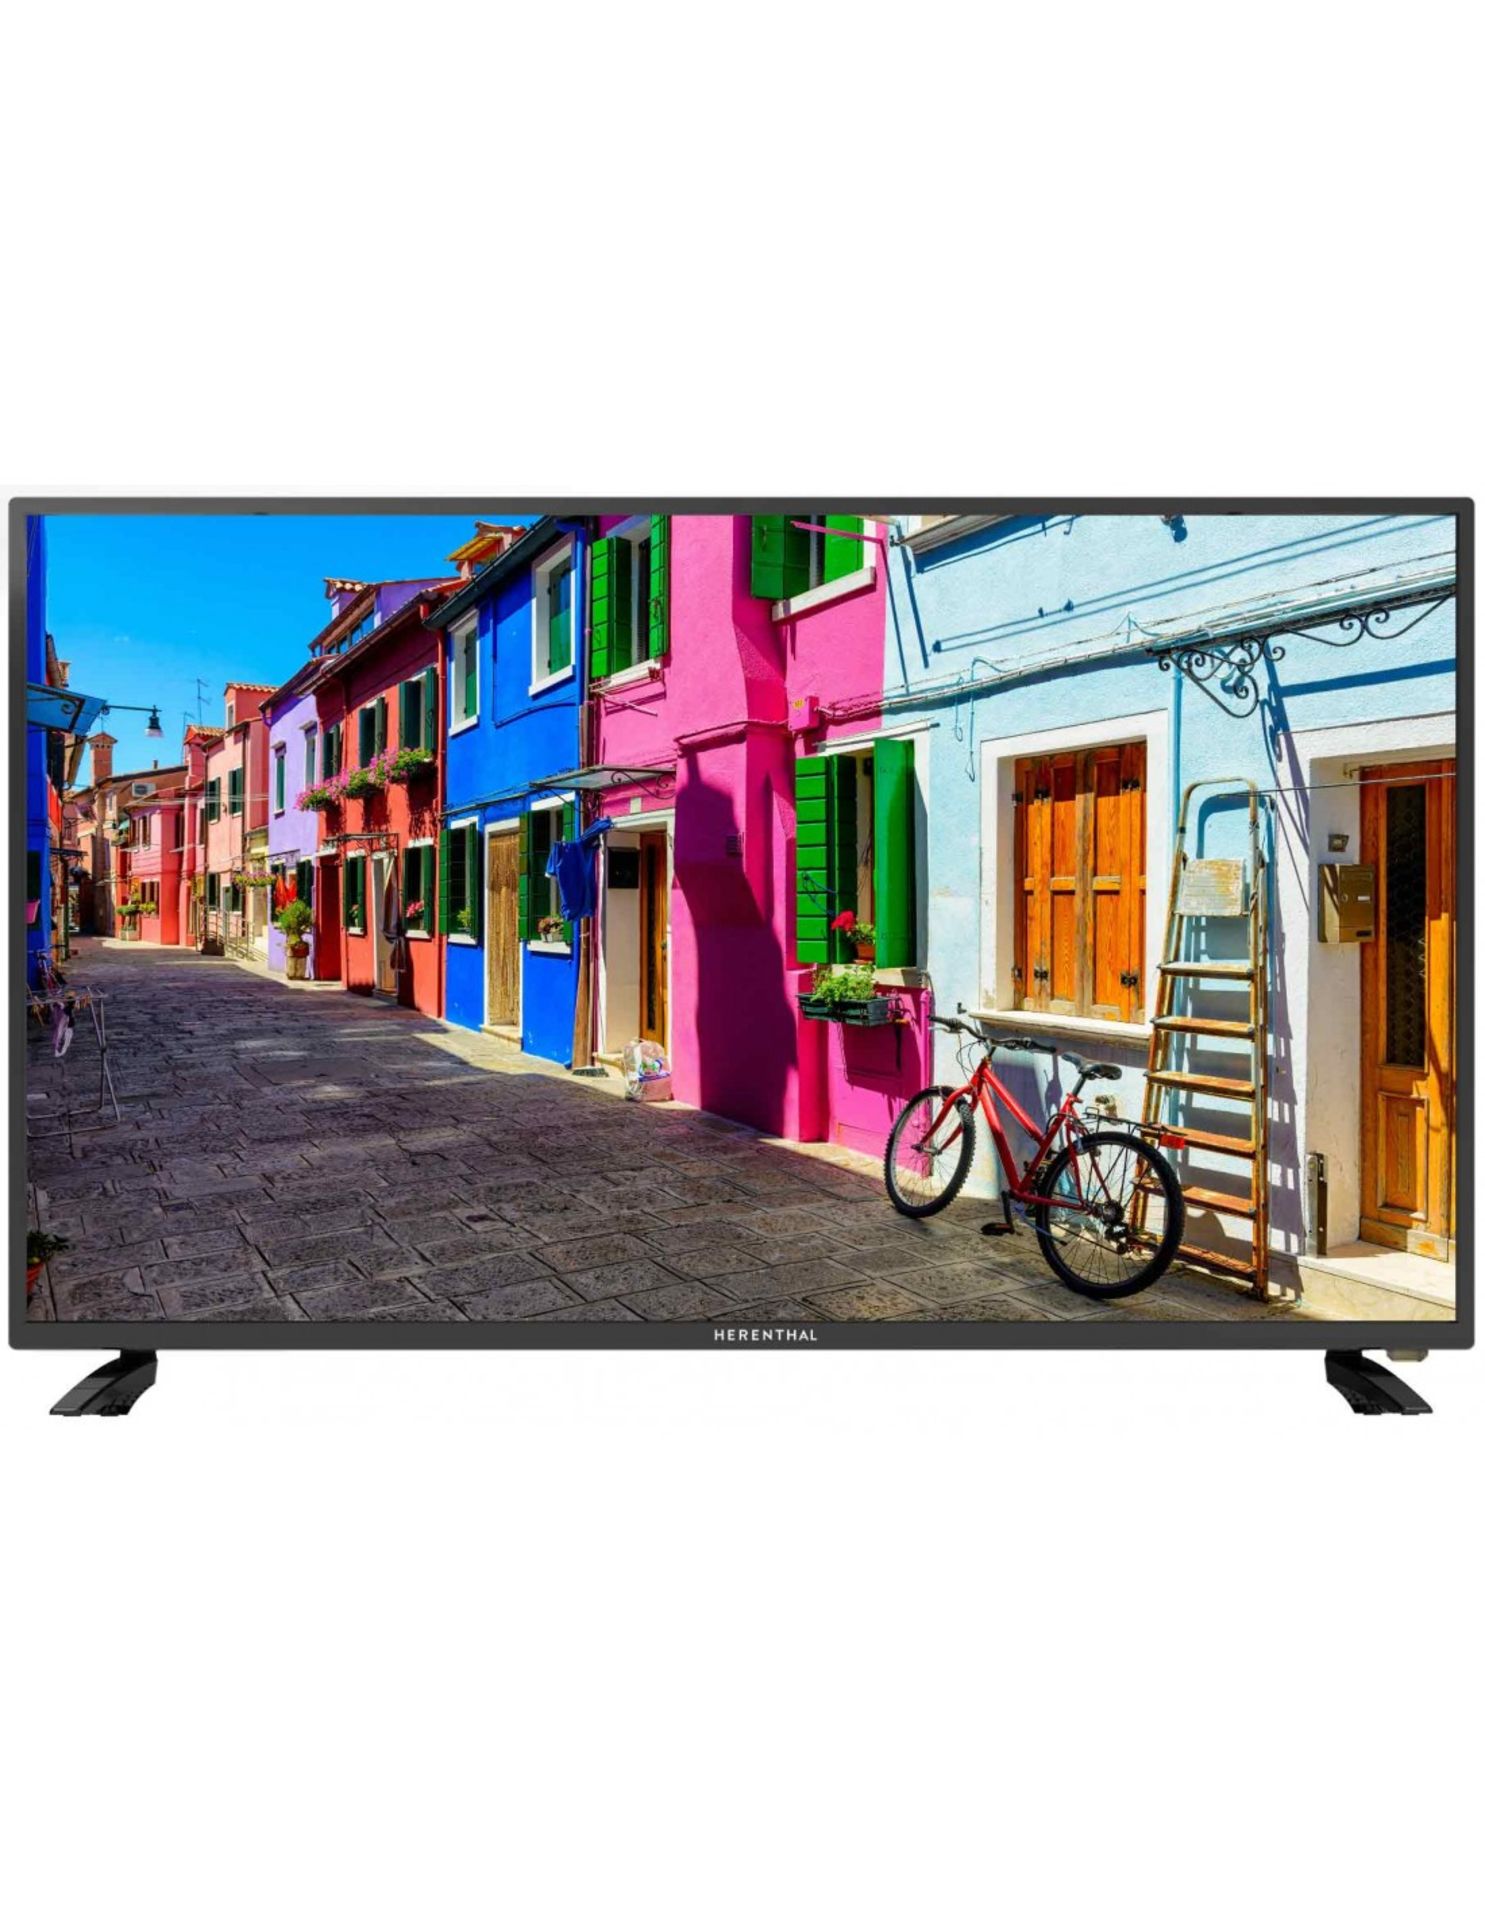 V Brand New Herenthal 40" Smart TV - Full HD - EU To UK Adapter Required